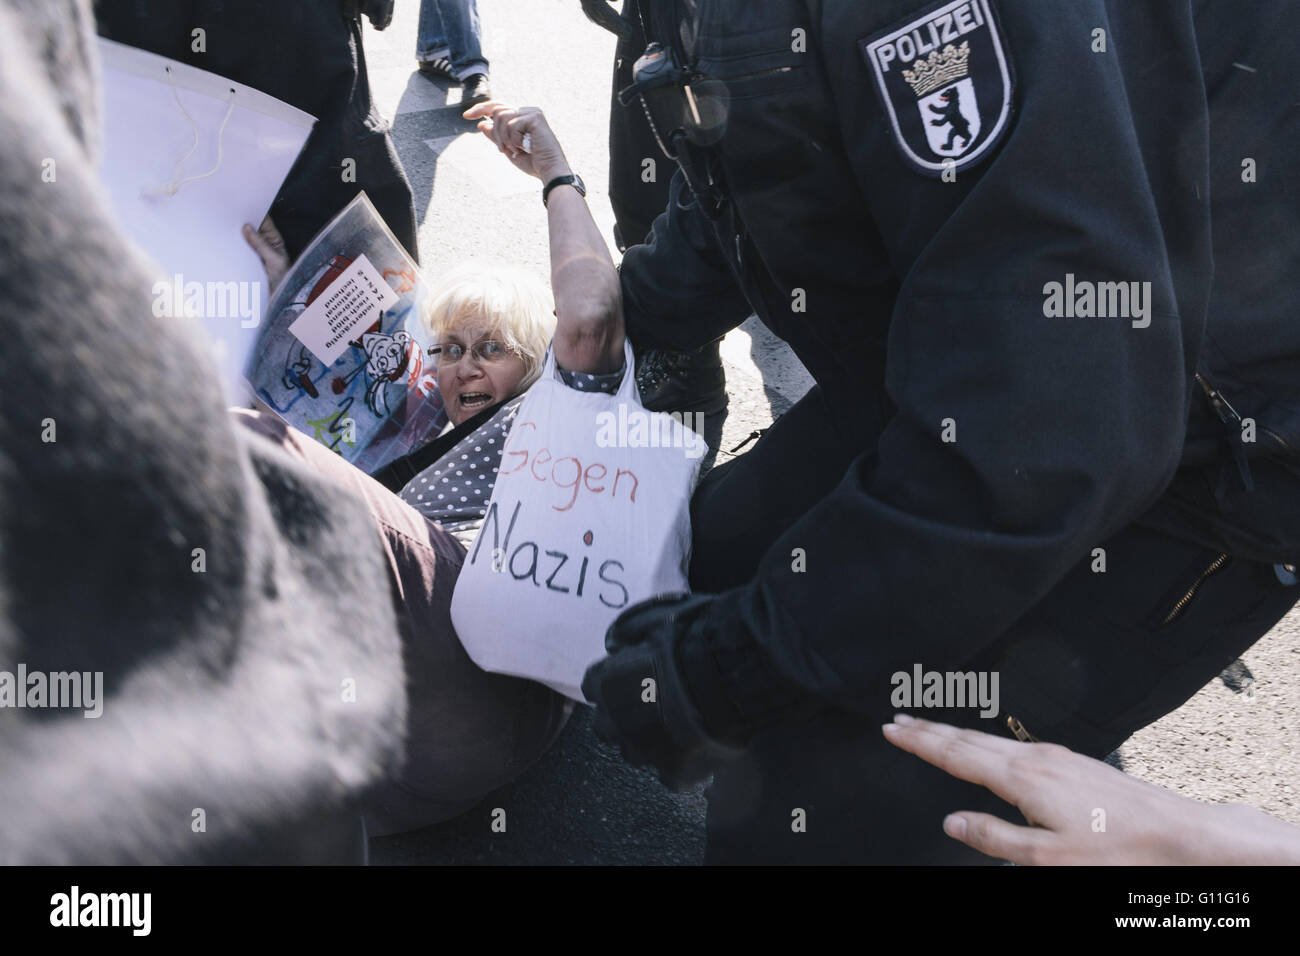 Berlin, Berlin, Germany. 7th May, 2016. An elderly woman in conflict with the police during counter protests against the rally held under the motto 'Merkel muss weg![Merkel must go]' organised by far-right group 'We for Berlin & We for Germany' Credit:  Jan Scheunert/ZUMA Wire/Alamy Live News Stock Photo